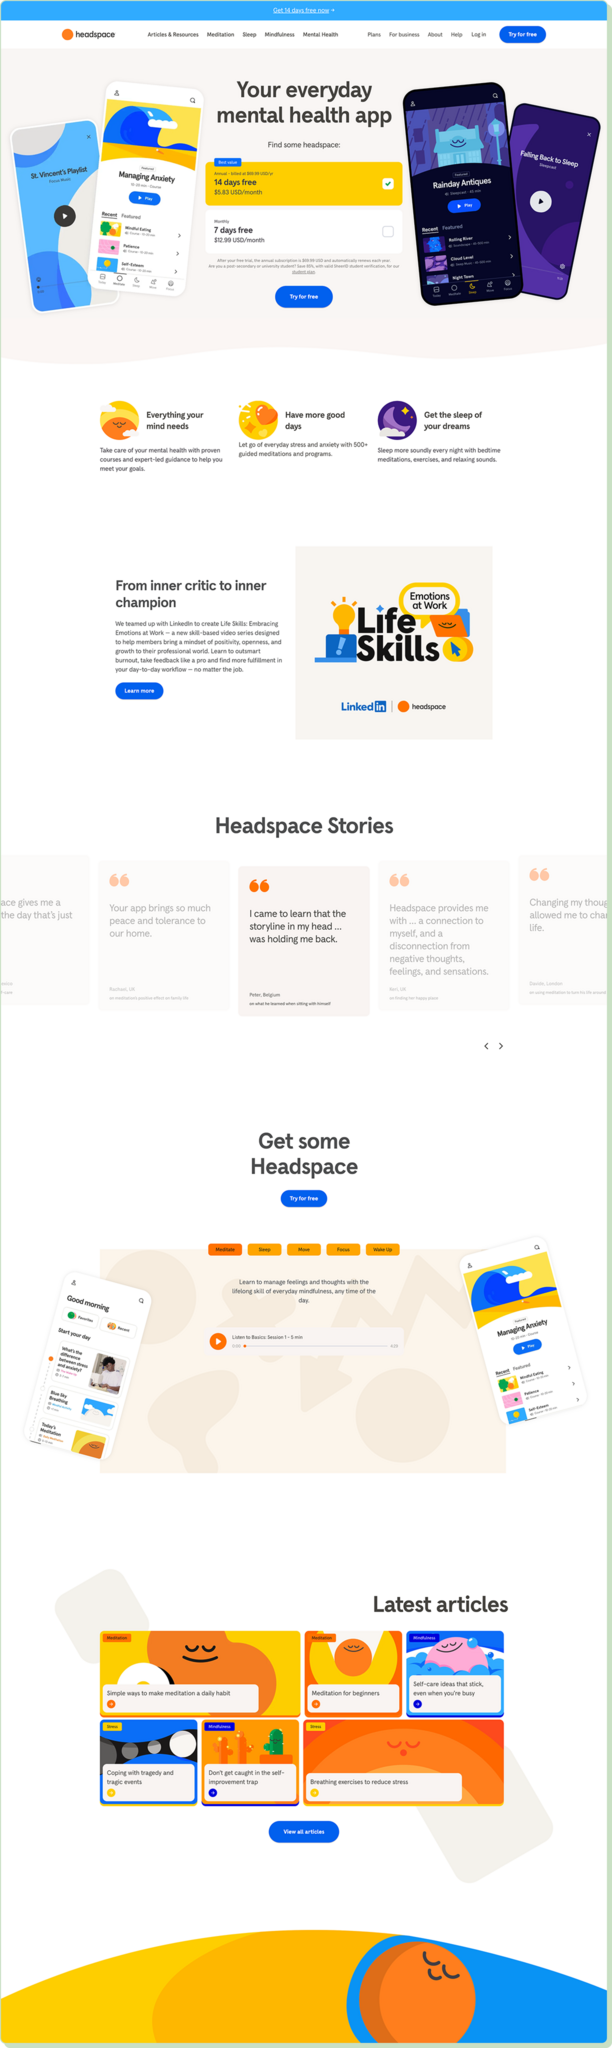 Headspace product landing page